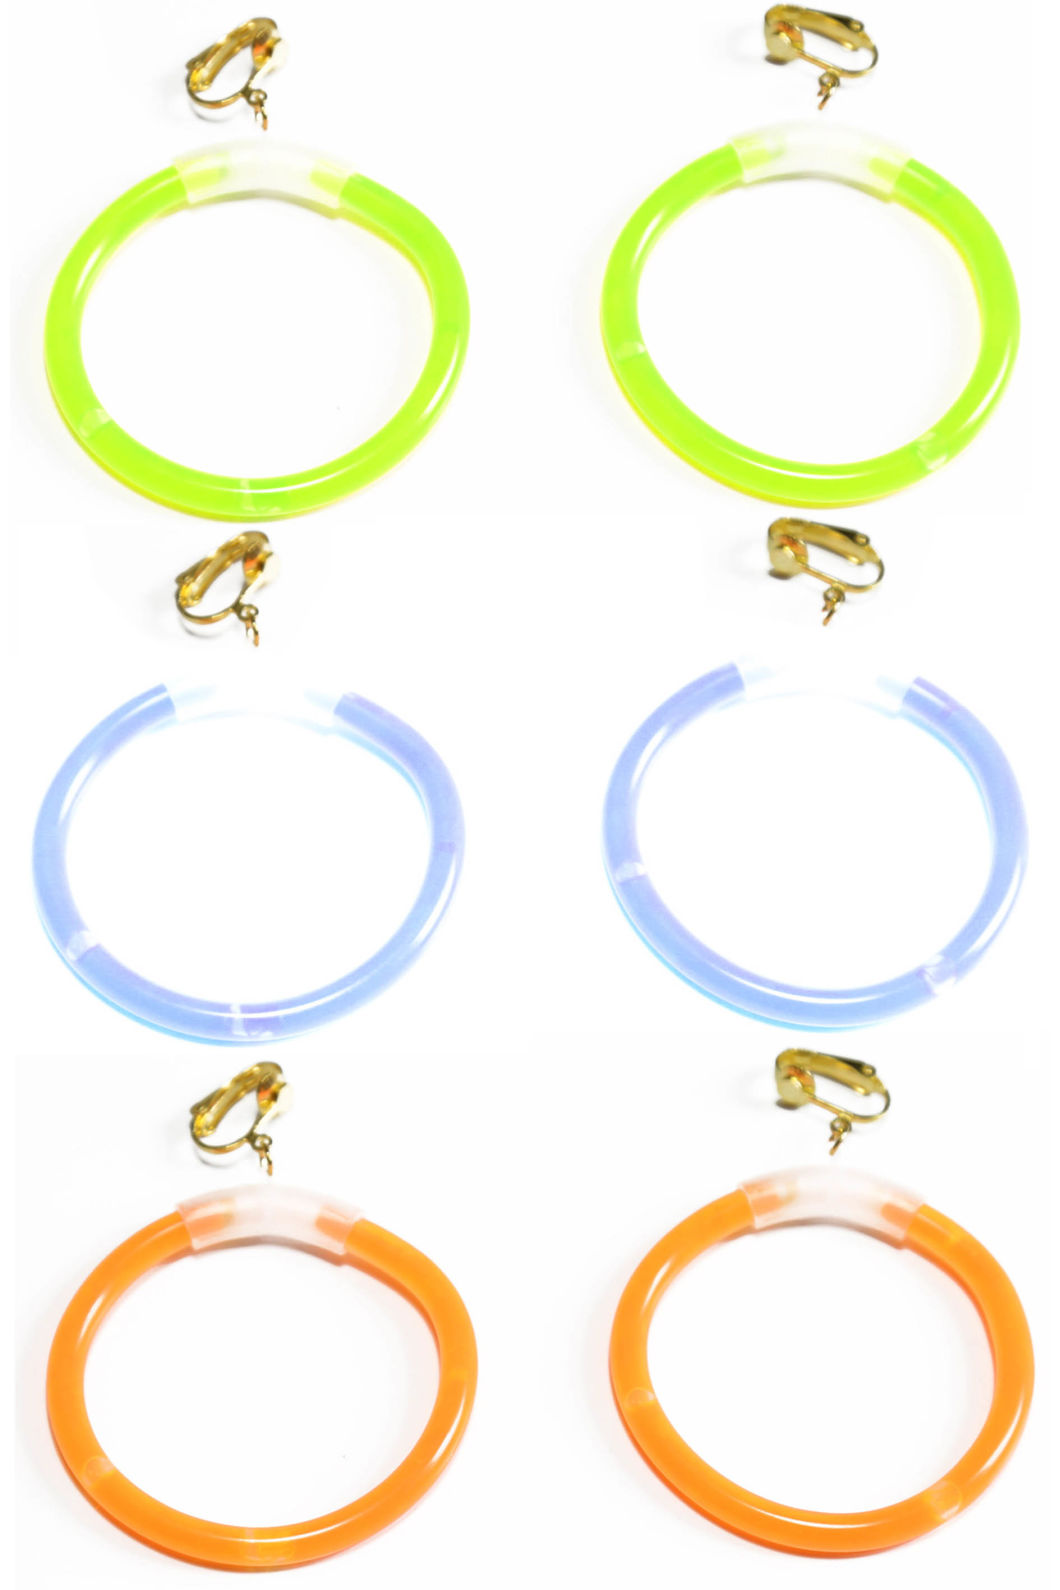 Club Party Decoration Jewelry Glowing Earrings